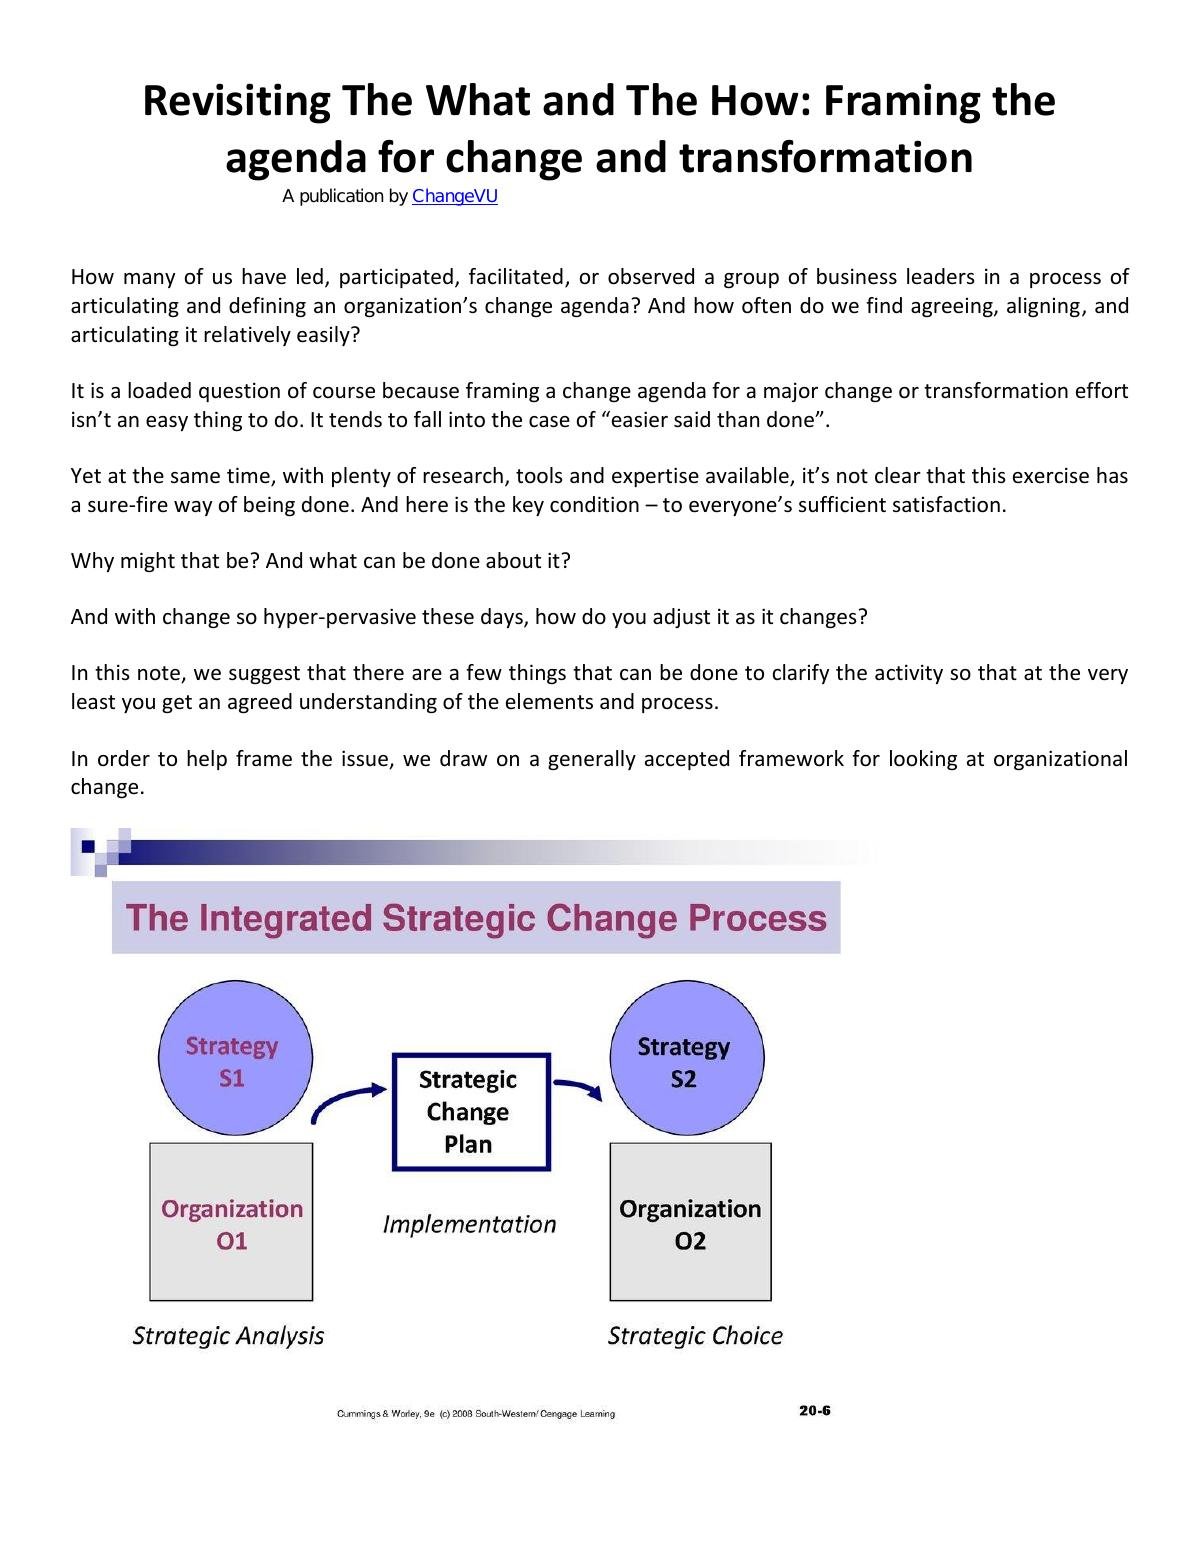 Revisiting The What and The How: Framing the agenda for change and transformation